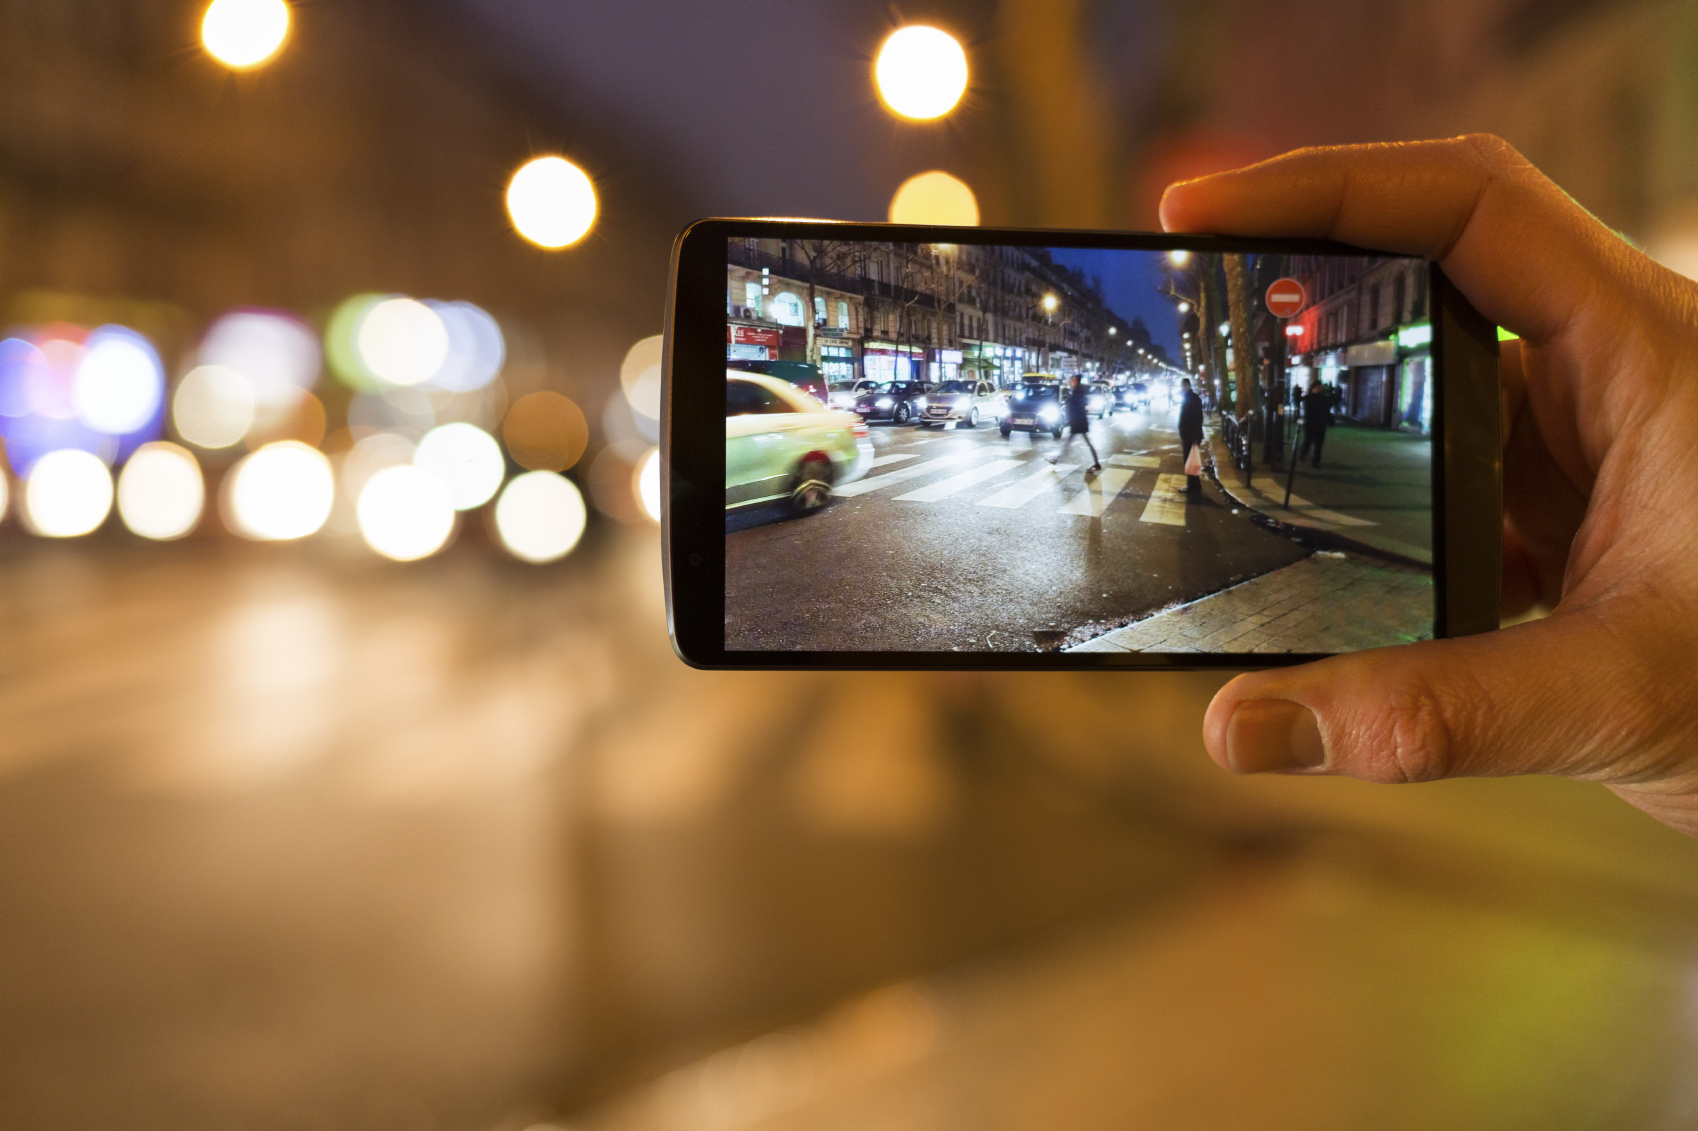 Man makes a picture in the street with his mobile phone. Night light bokeh background